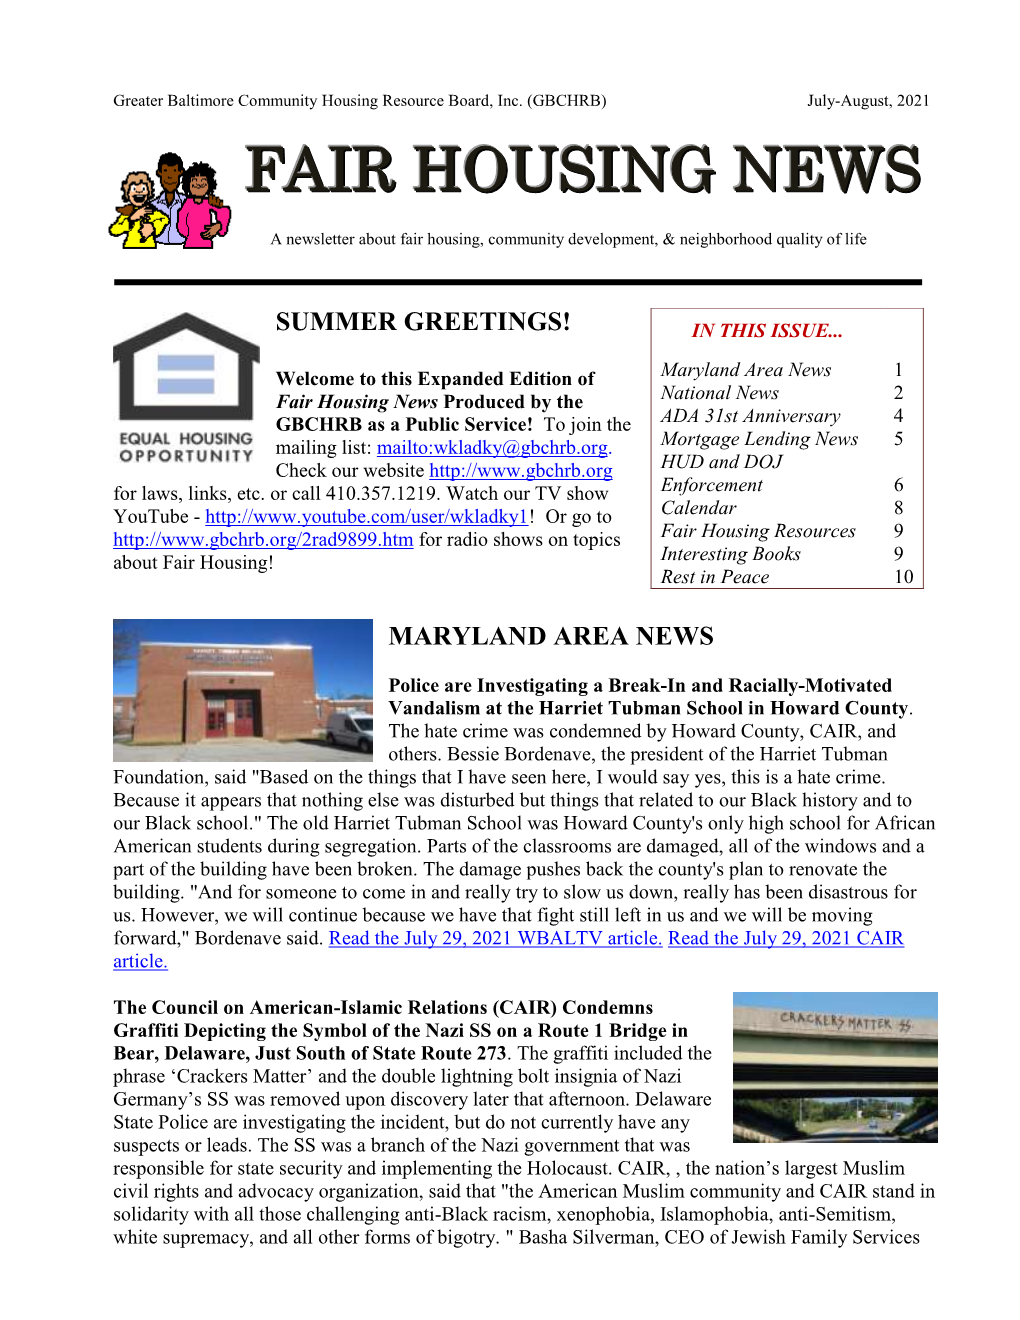 In Current National & Maryland Fair Housing News…